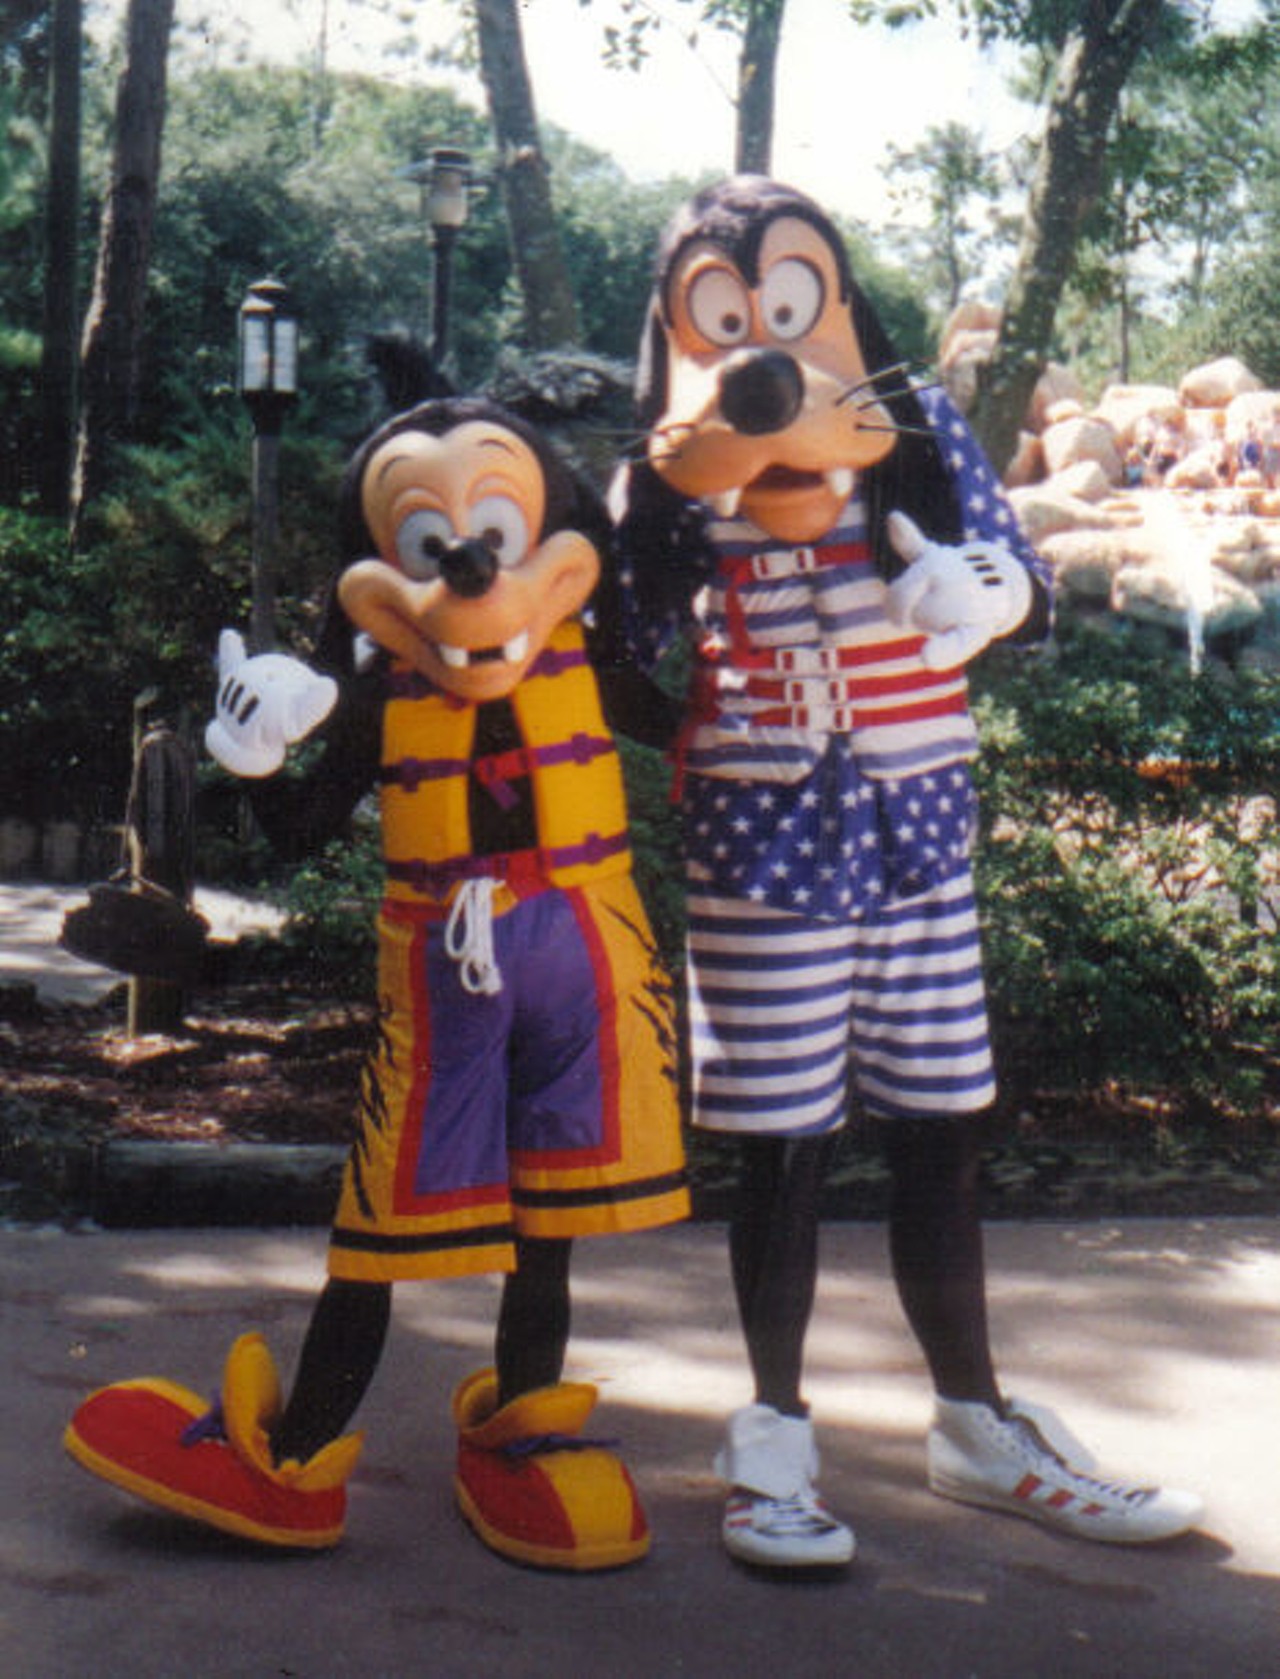 Goofy was River Country's mascot. Via waltdatedworld.bravepages.com